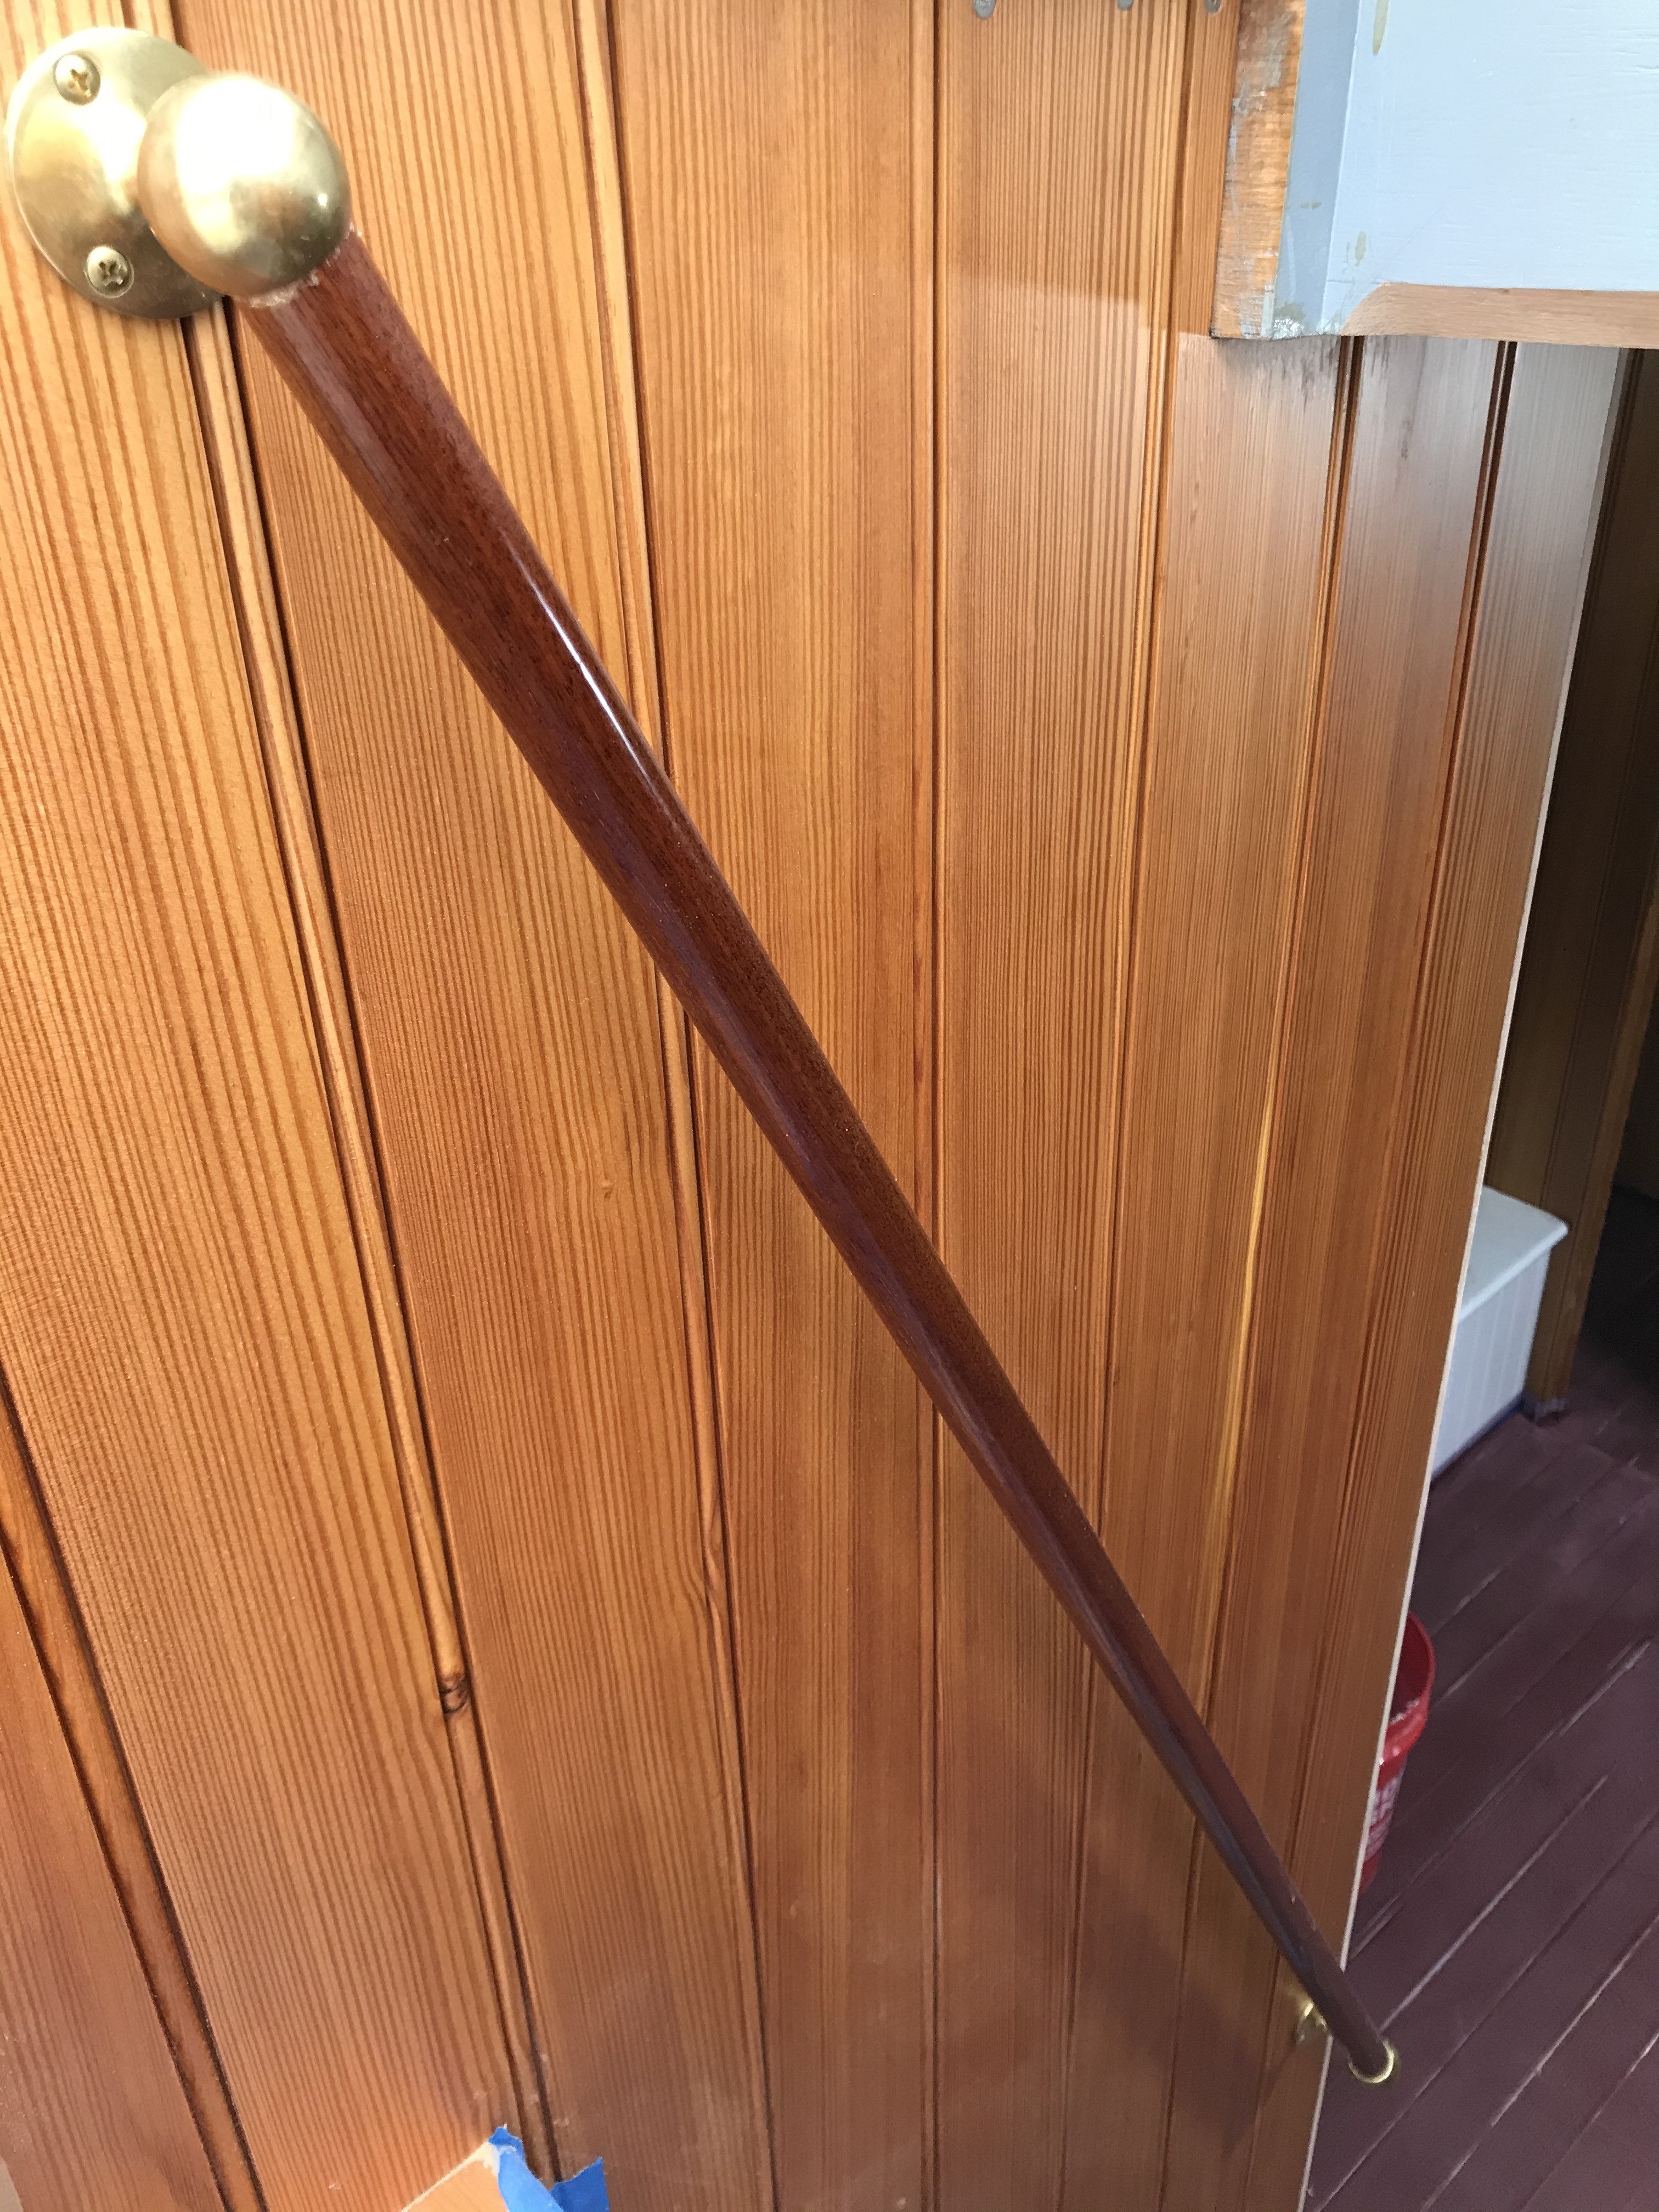 This image is an example of the high level of fit and finish being accomplished by our team here at the Shipyard.  This is the Aft Cabin handrail at the companionway entrance.